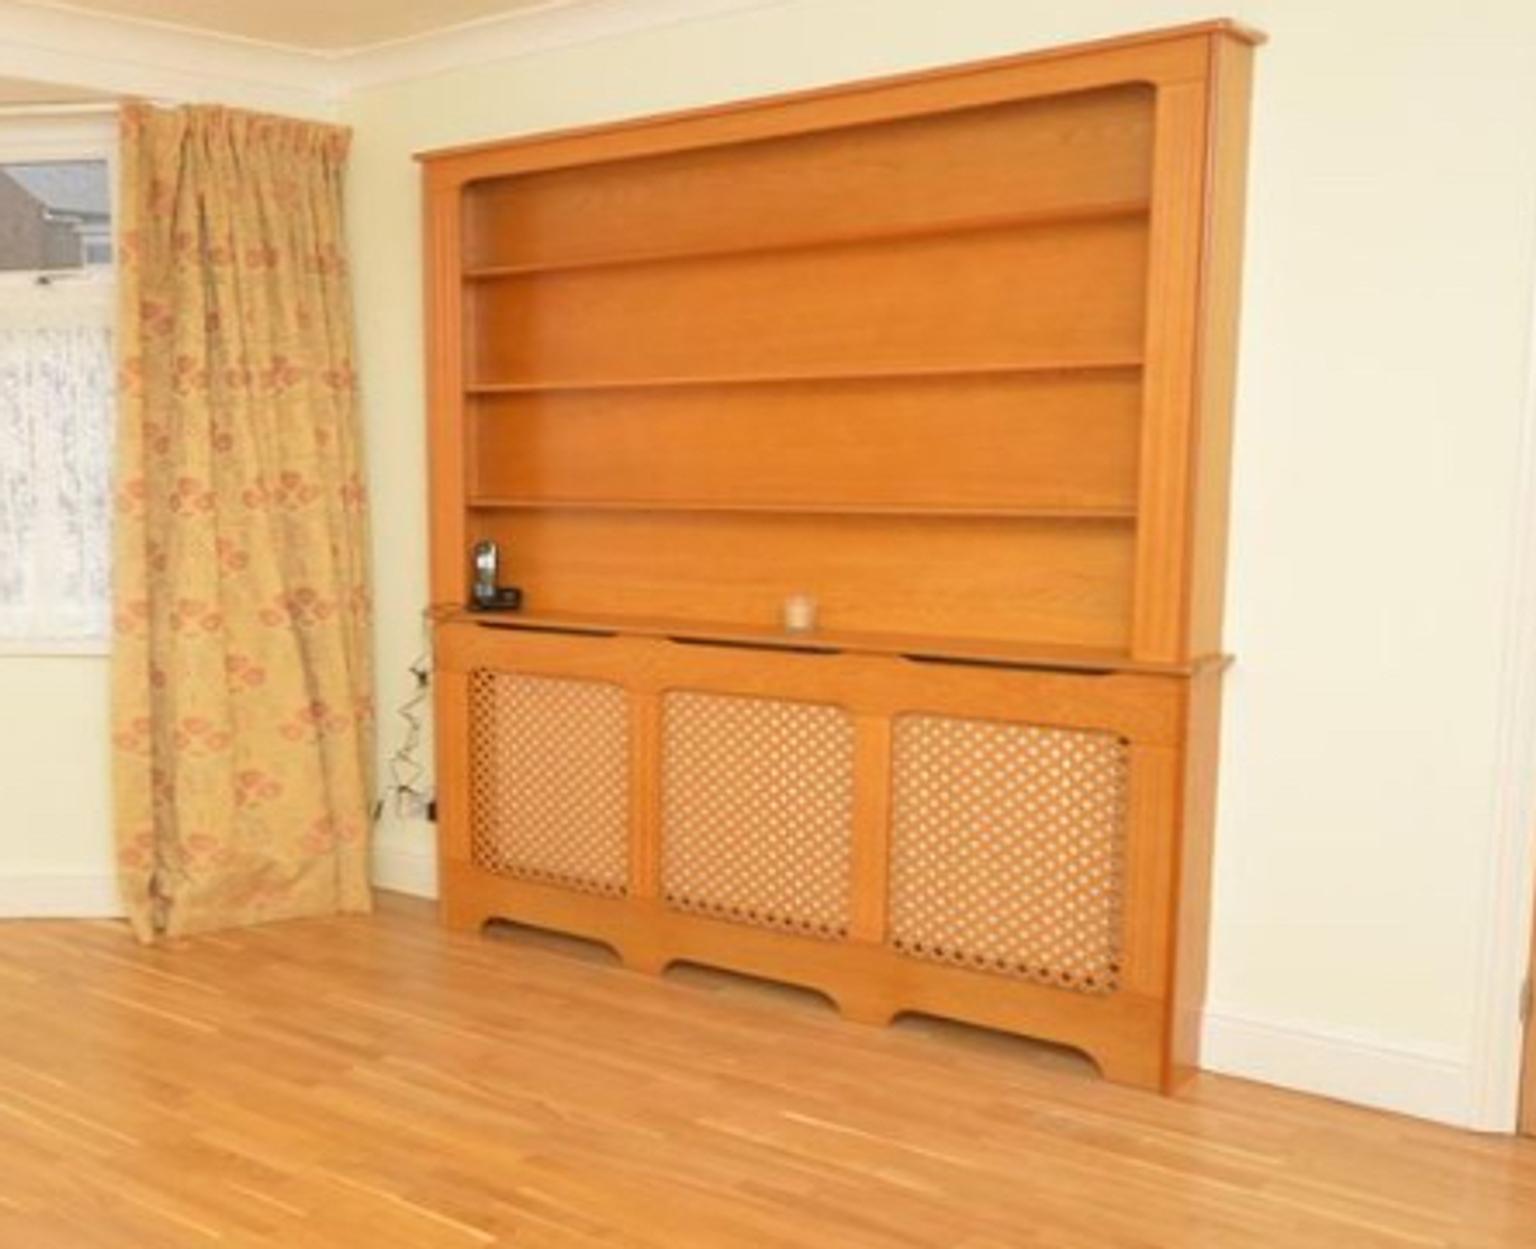 Radiator Cover With Matching Bookcase In Lu5 Dunstable For 105 00